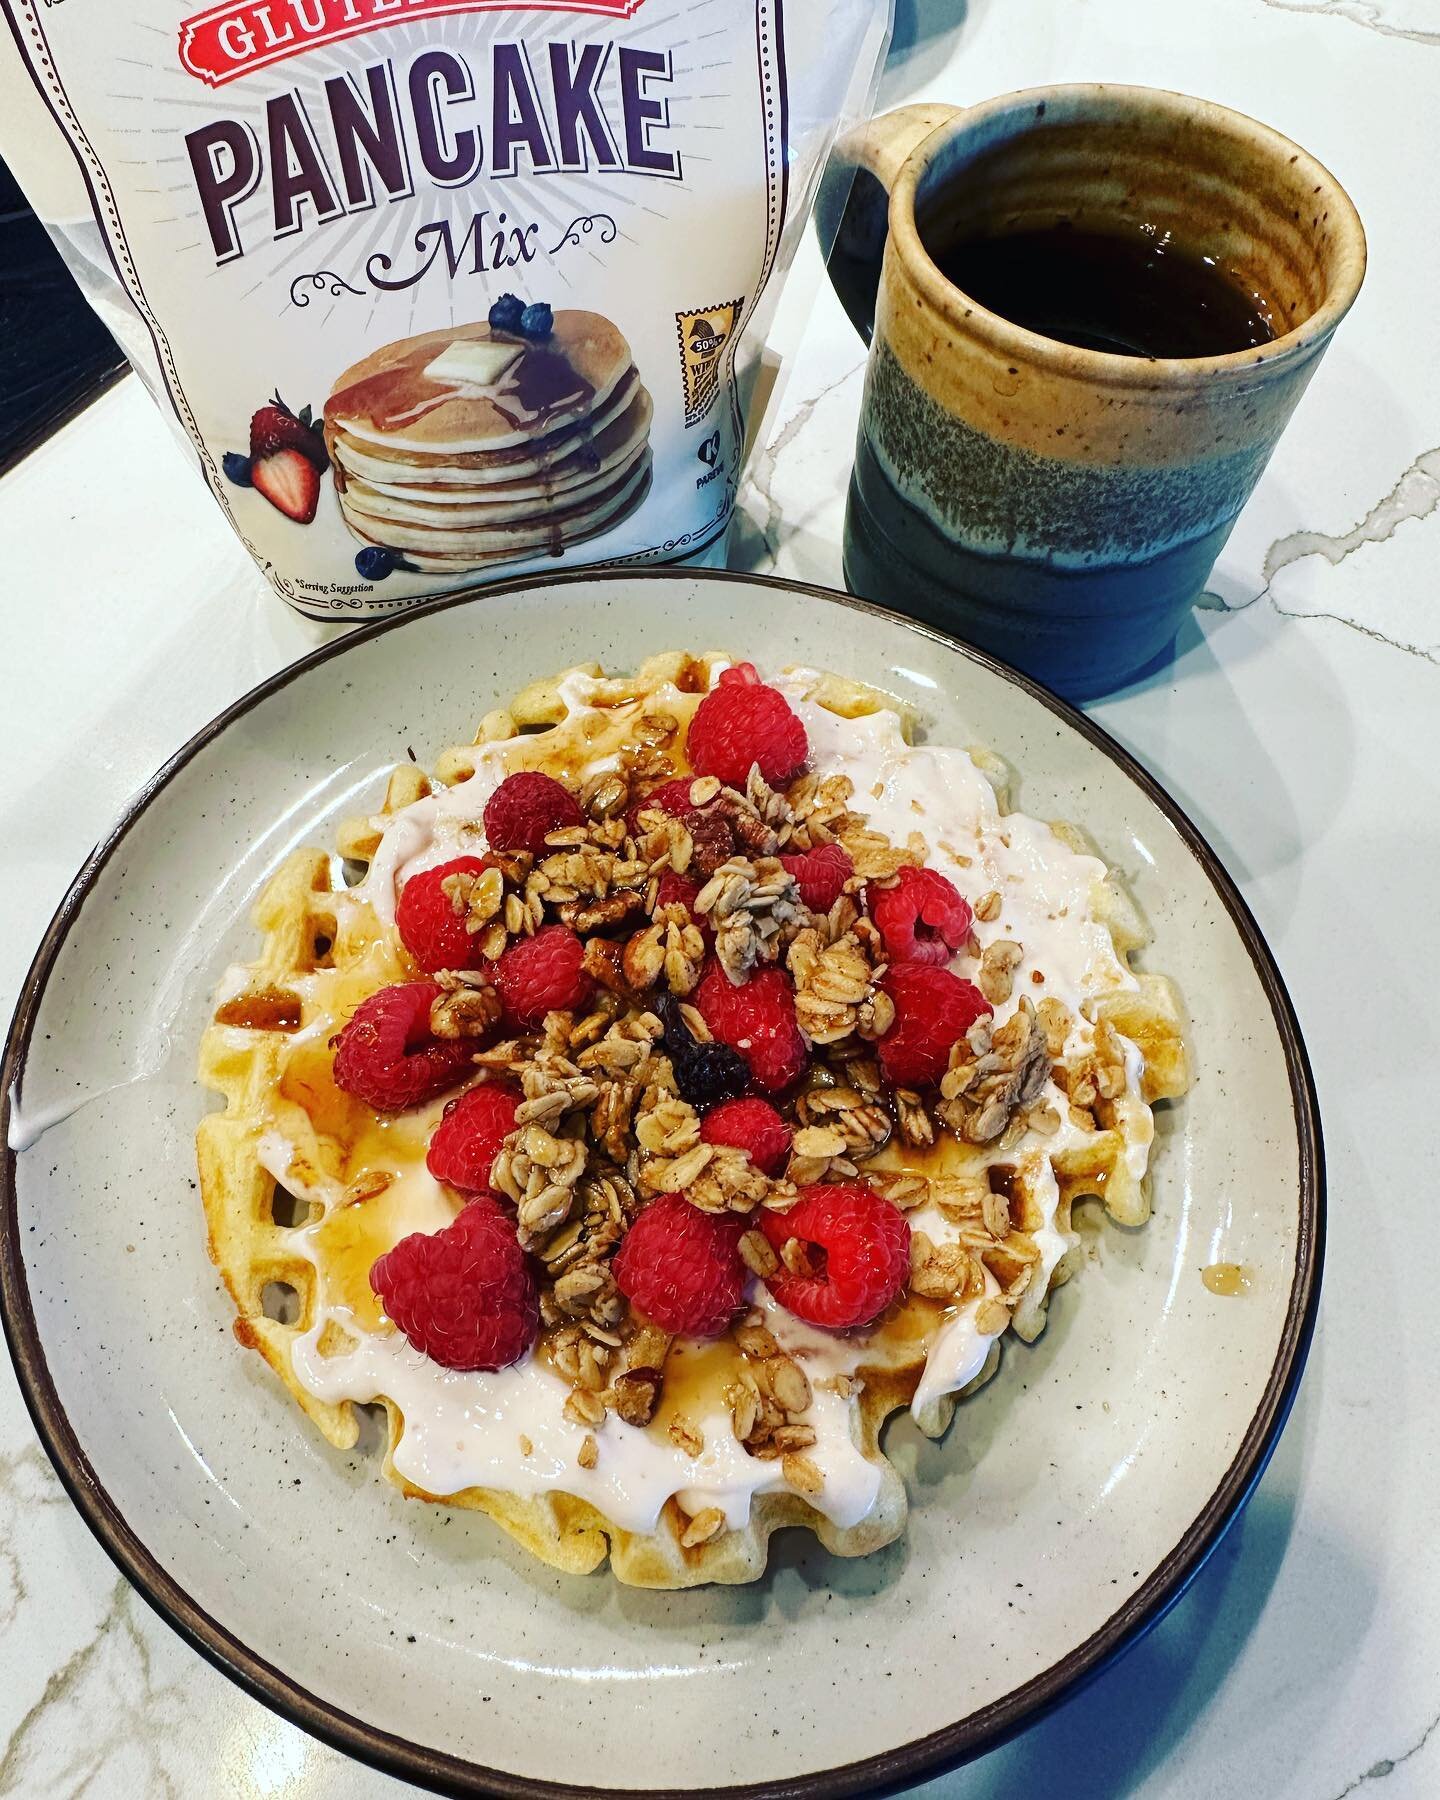 @bobsredmill #glutenfree pancake and waffle mix! Topped with Greek yogurt for protein, berries, and a sprinkle of GF granola. These are the best tasting GF waffles I&rsquo;ve had so far. I recommend blending the egg and milk mixture to give it a supe